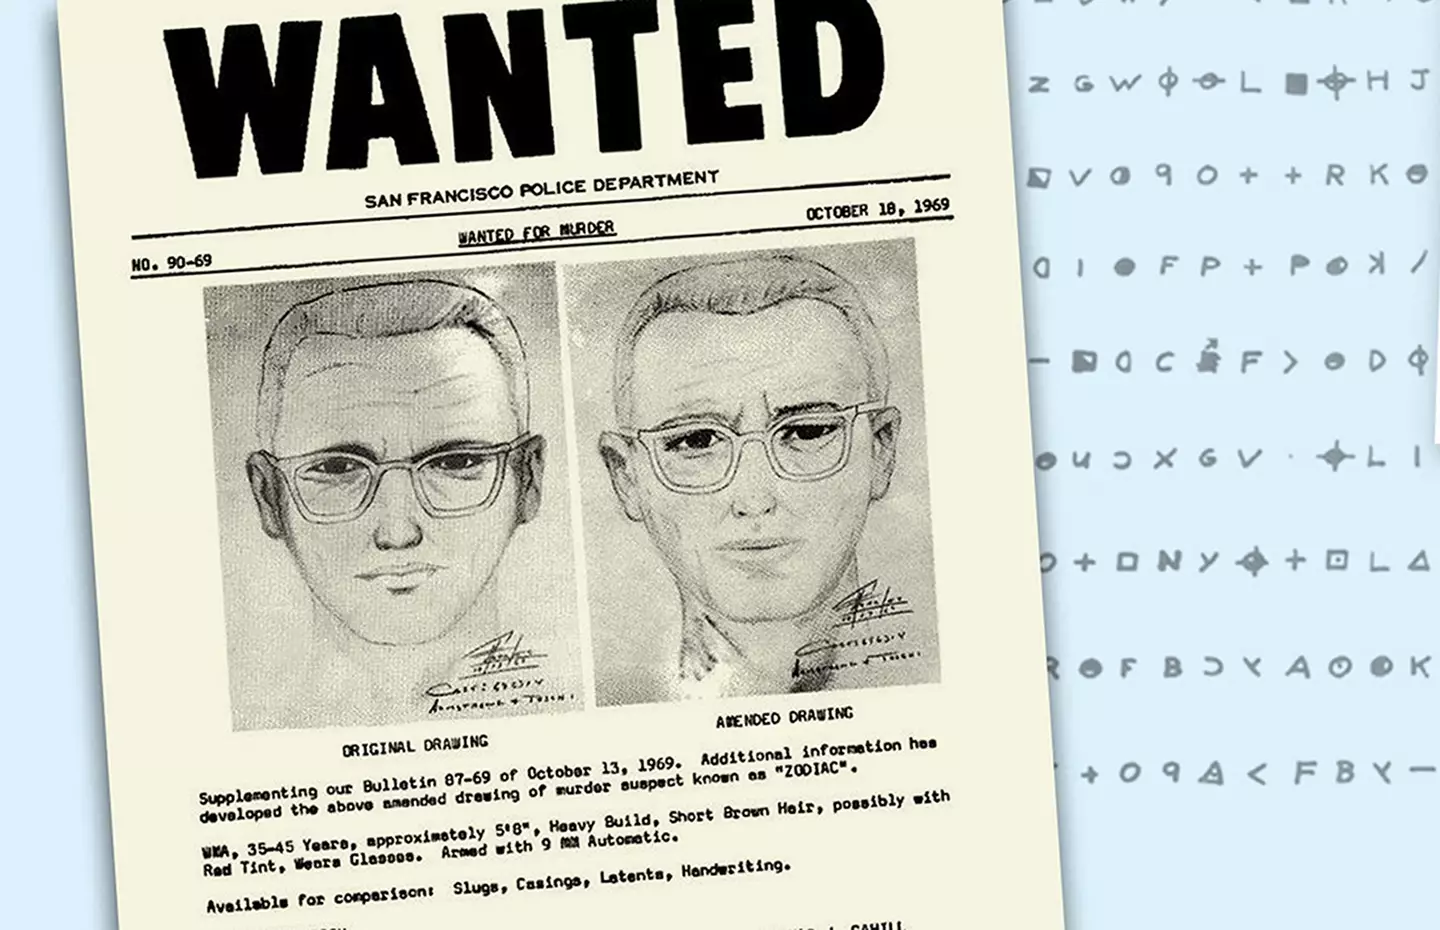 The Zodiac Killer's true appearance - and identity - is still unknown.